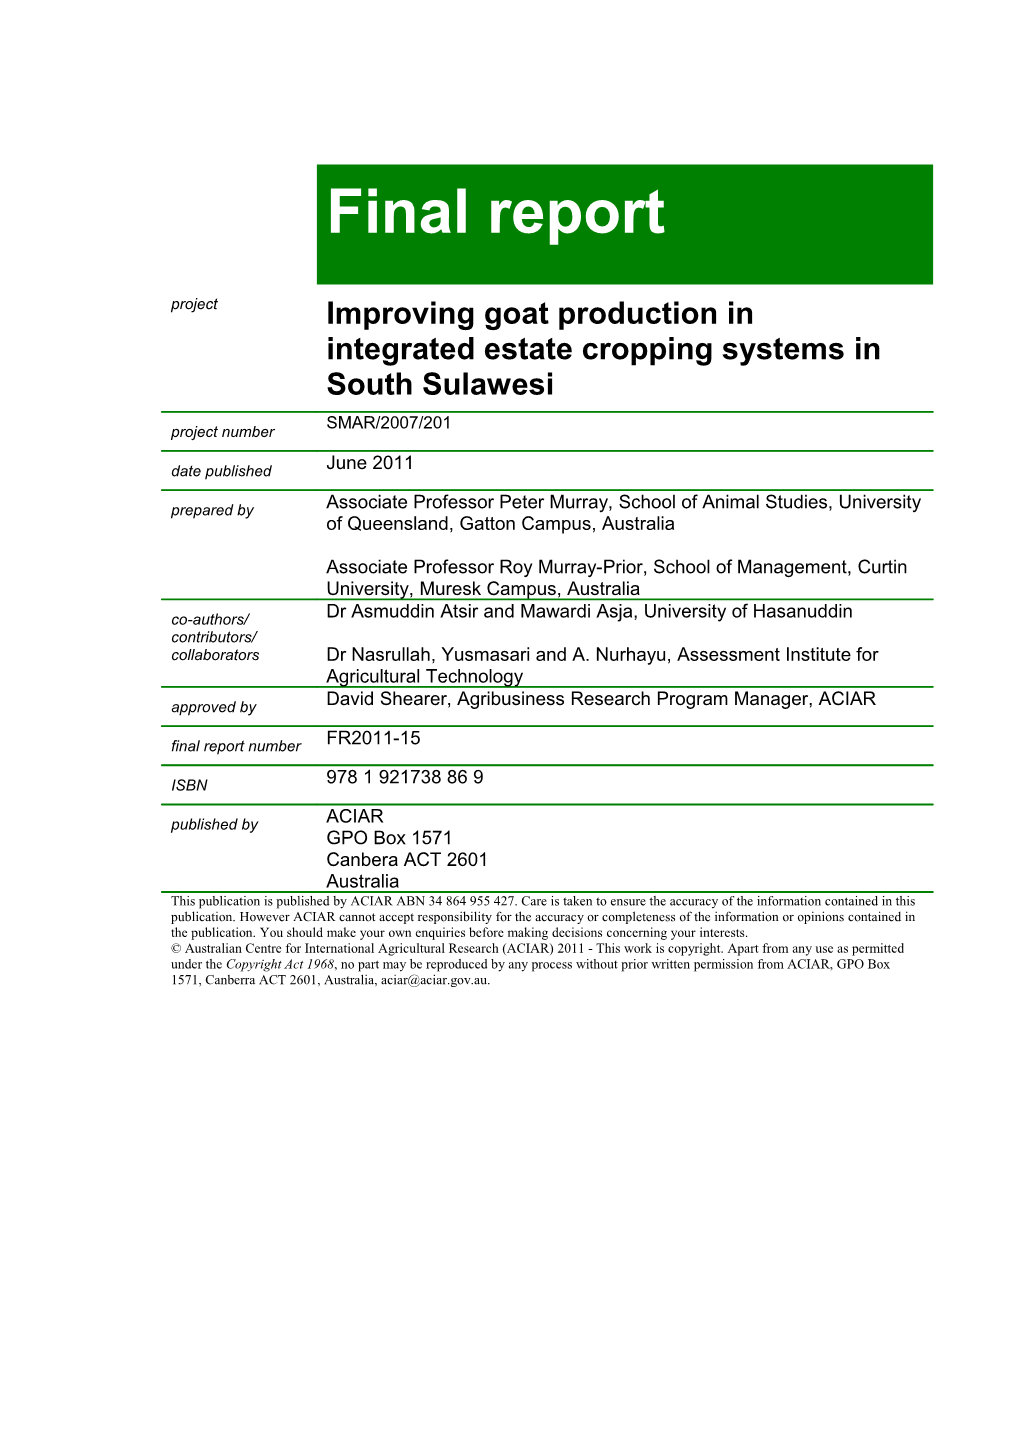 Final Report: Improving Goat Production in Integrated Estate Cropping Systems in South Sulawesi